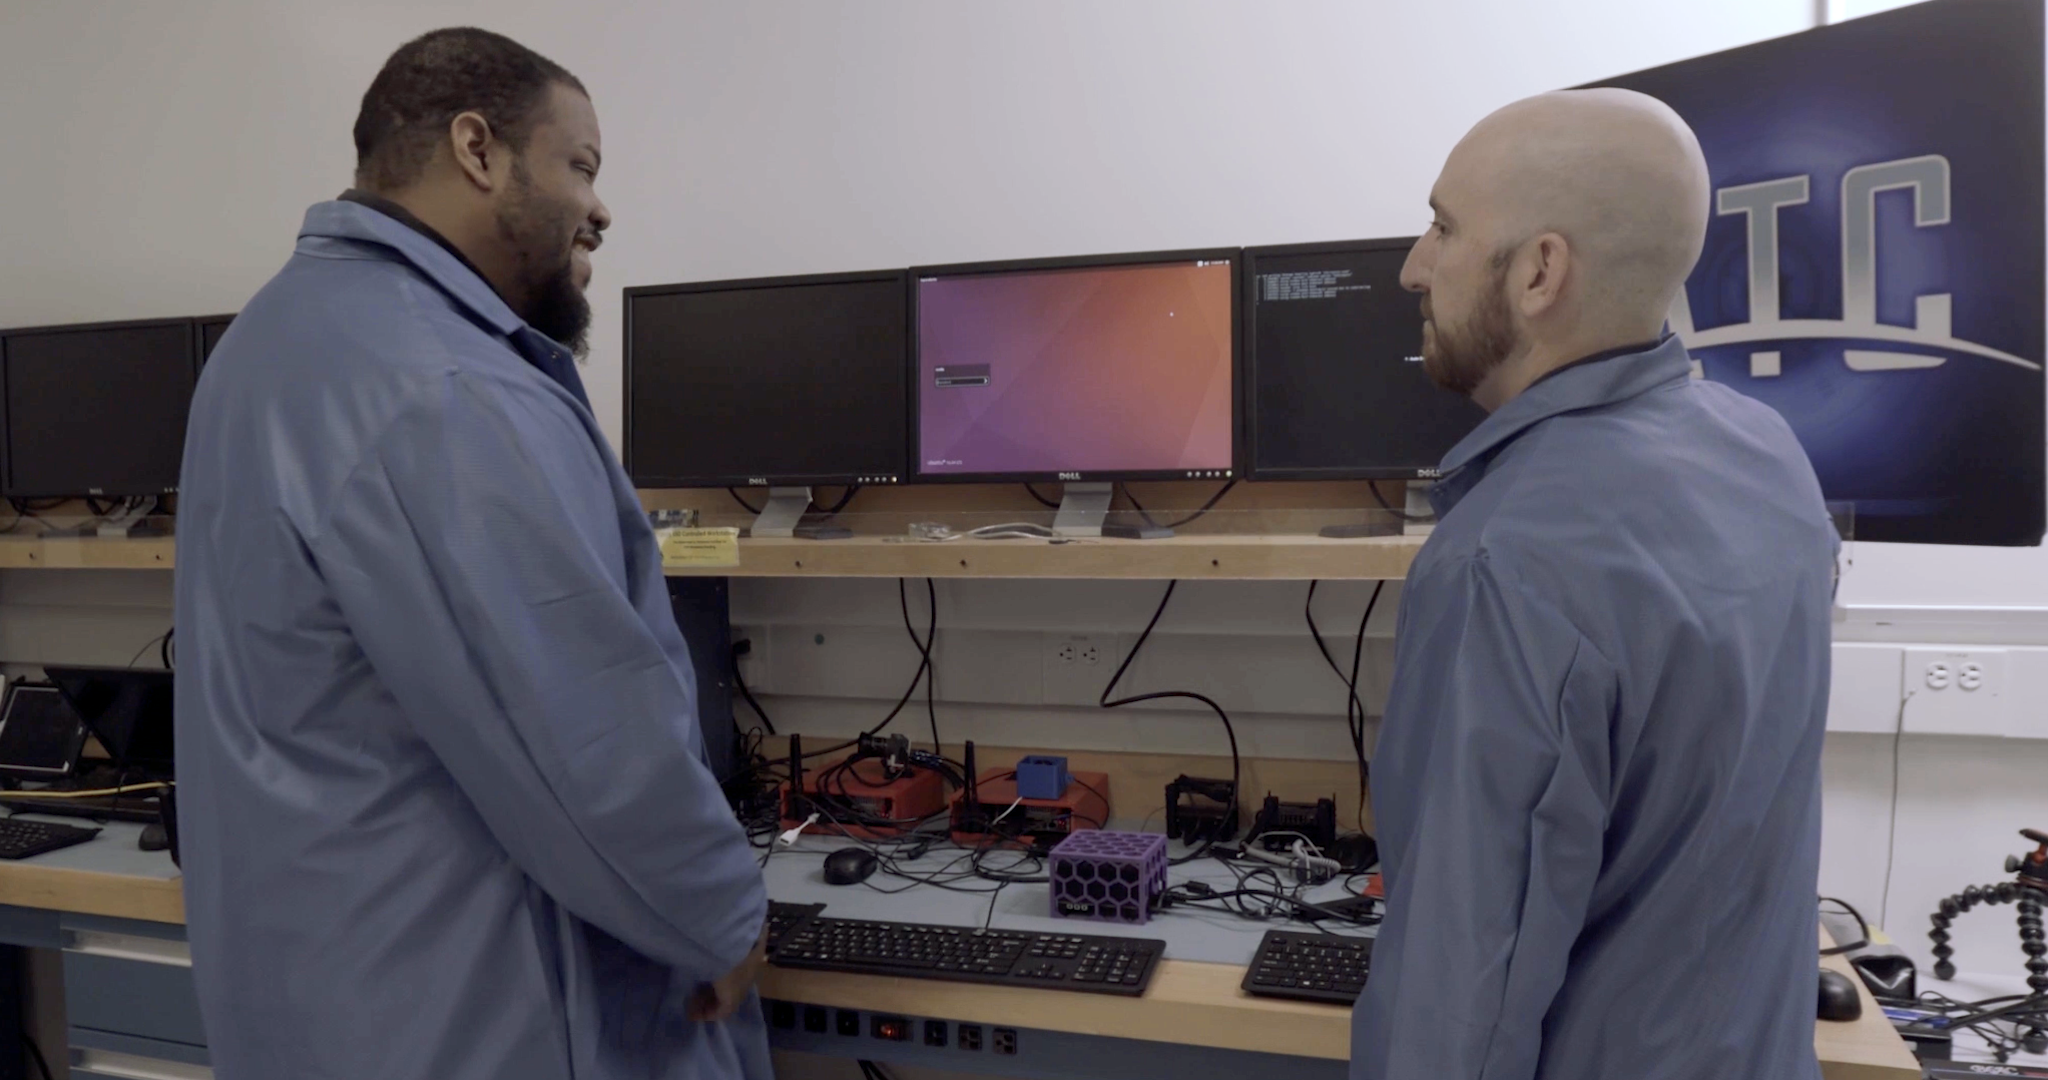 Dr. Bennie Lewis confers with Aaron Christian as their team brings advanced AI software together with physical hardware.